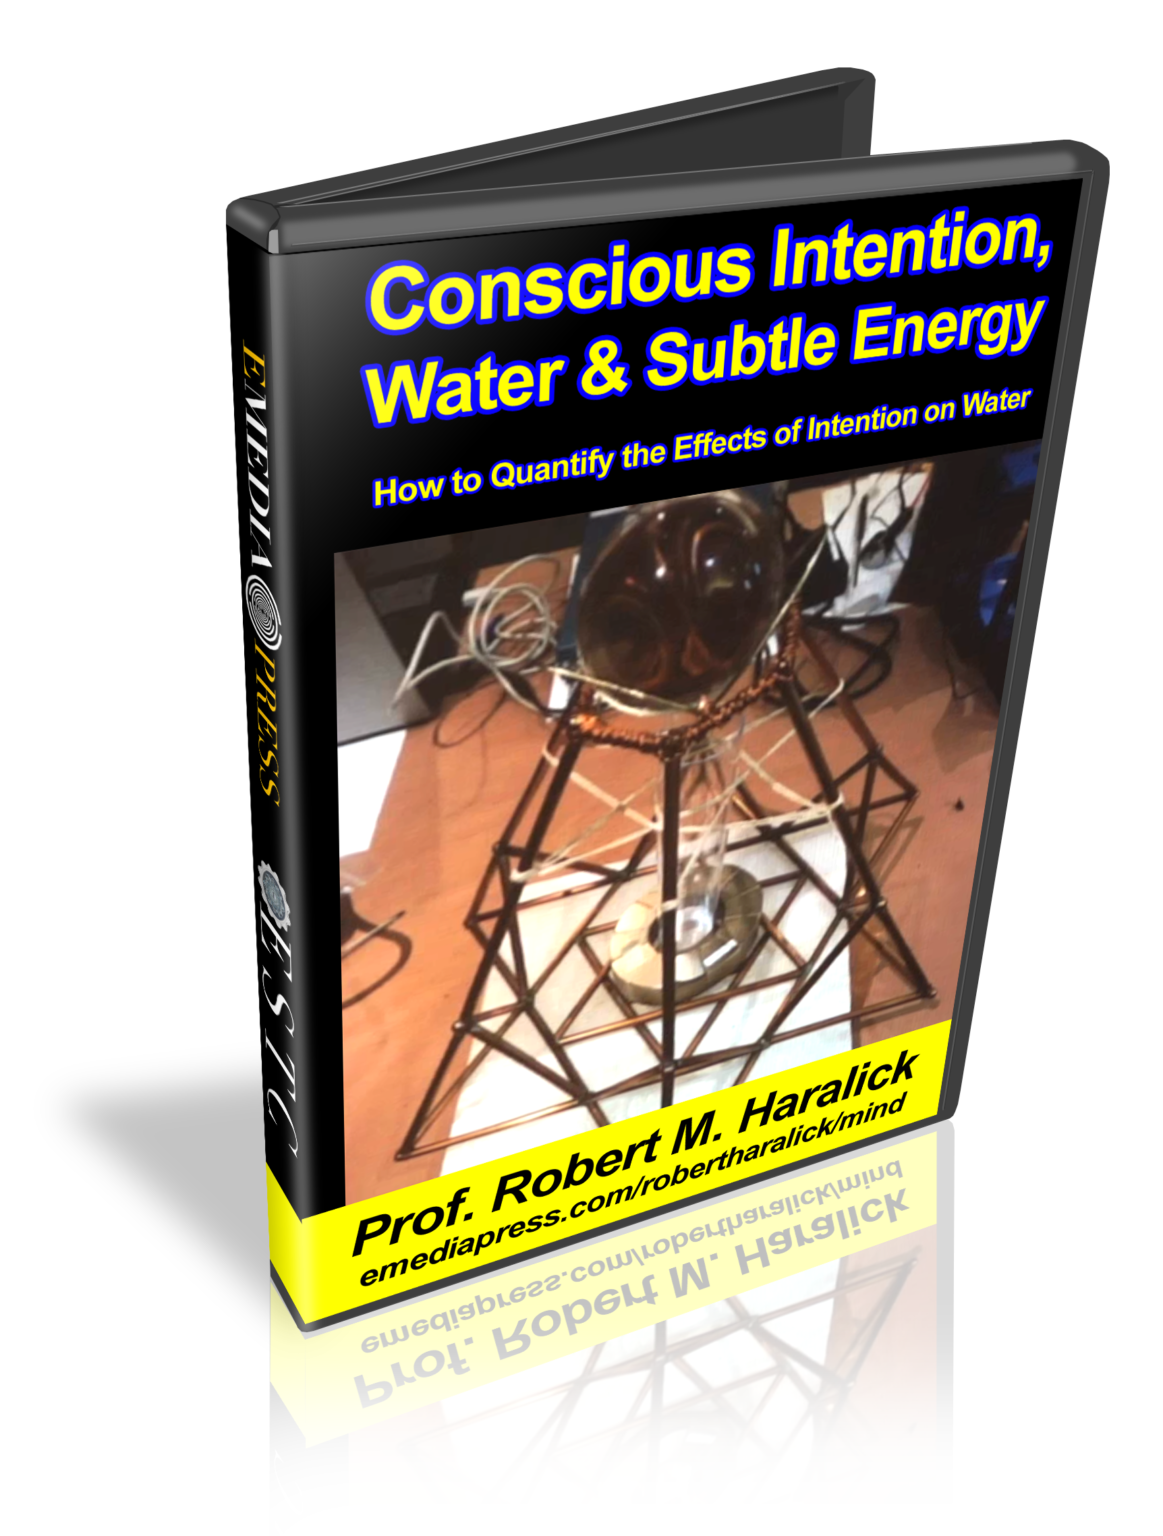 Conscious Intention, Water And Subtle Energy by Prof. Robert Haralick